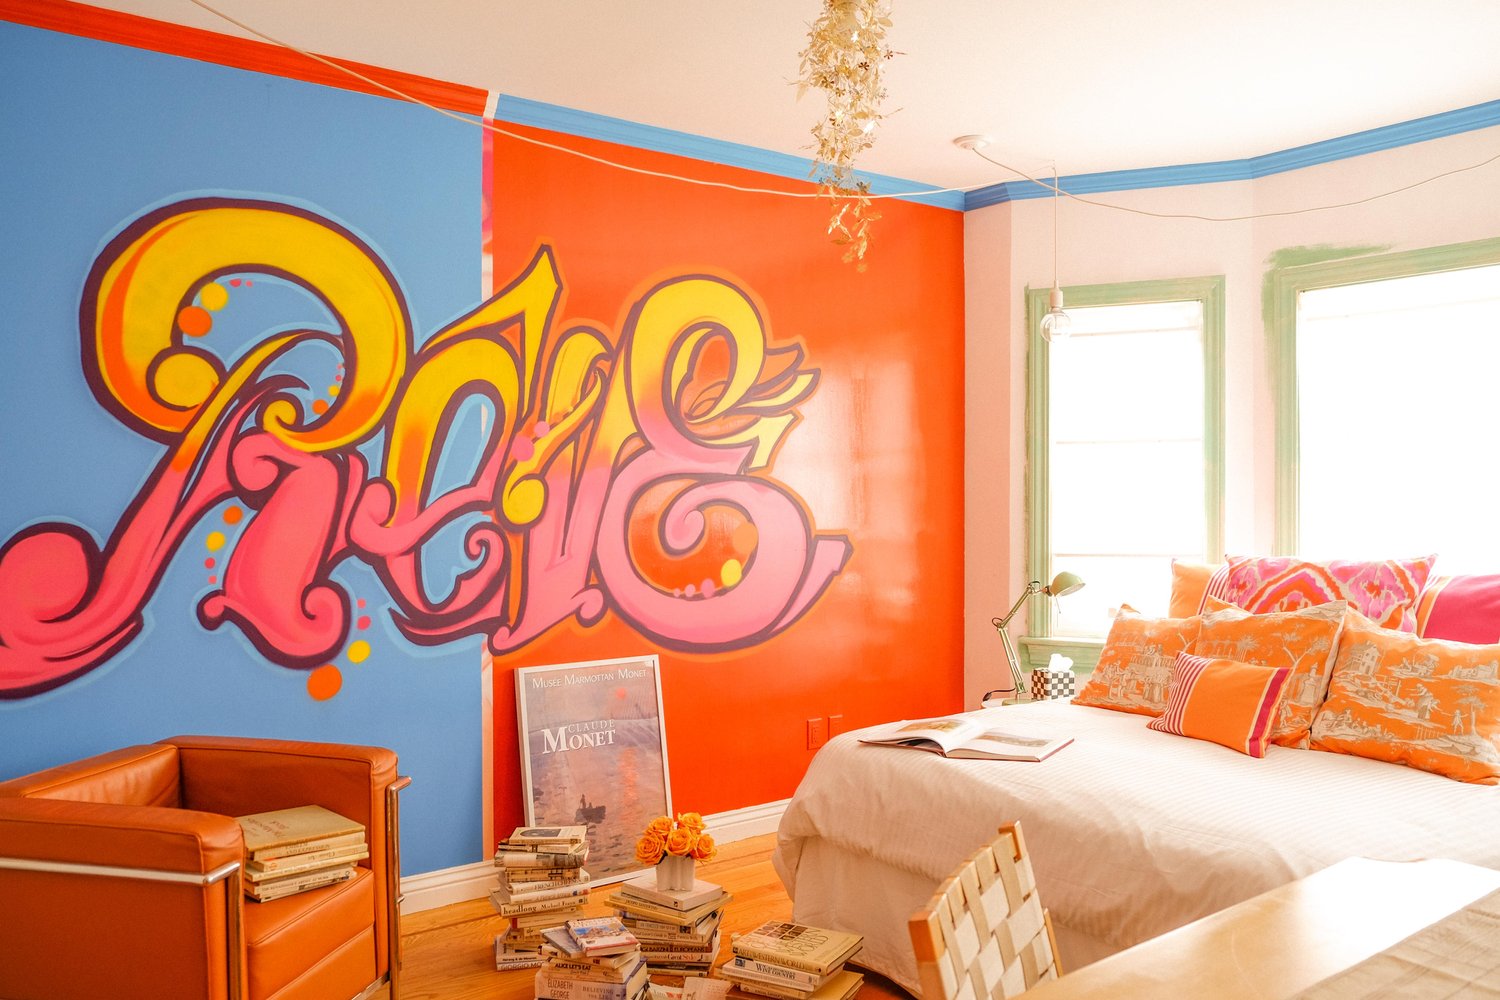 A vibrant room has an orange and blue wall with large graffiti art, an orange armchair, a bed with colorful pillows, stacks of books, and bright windows.